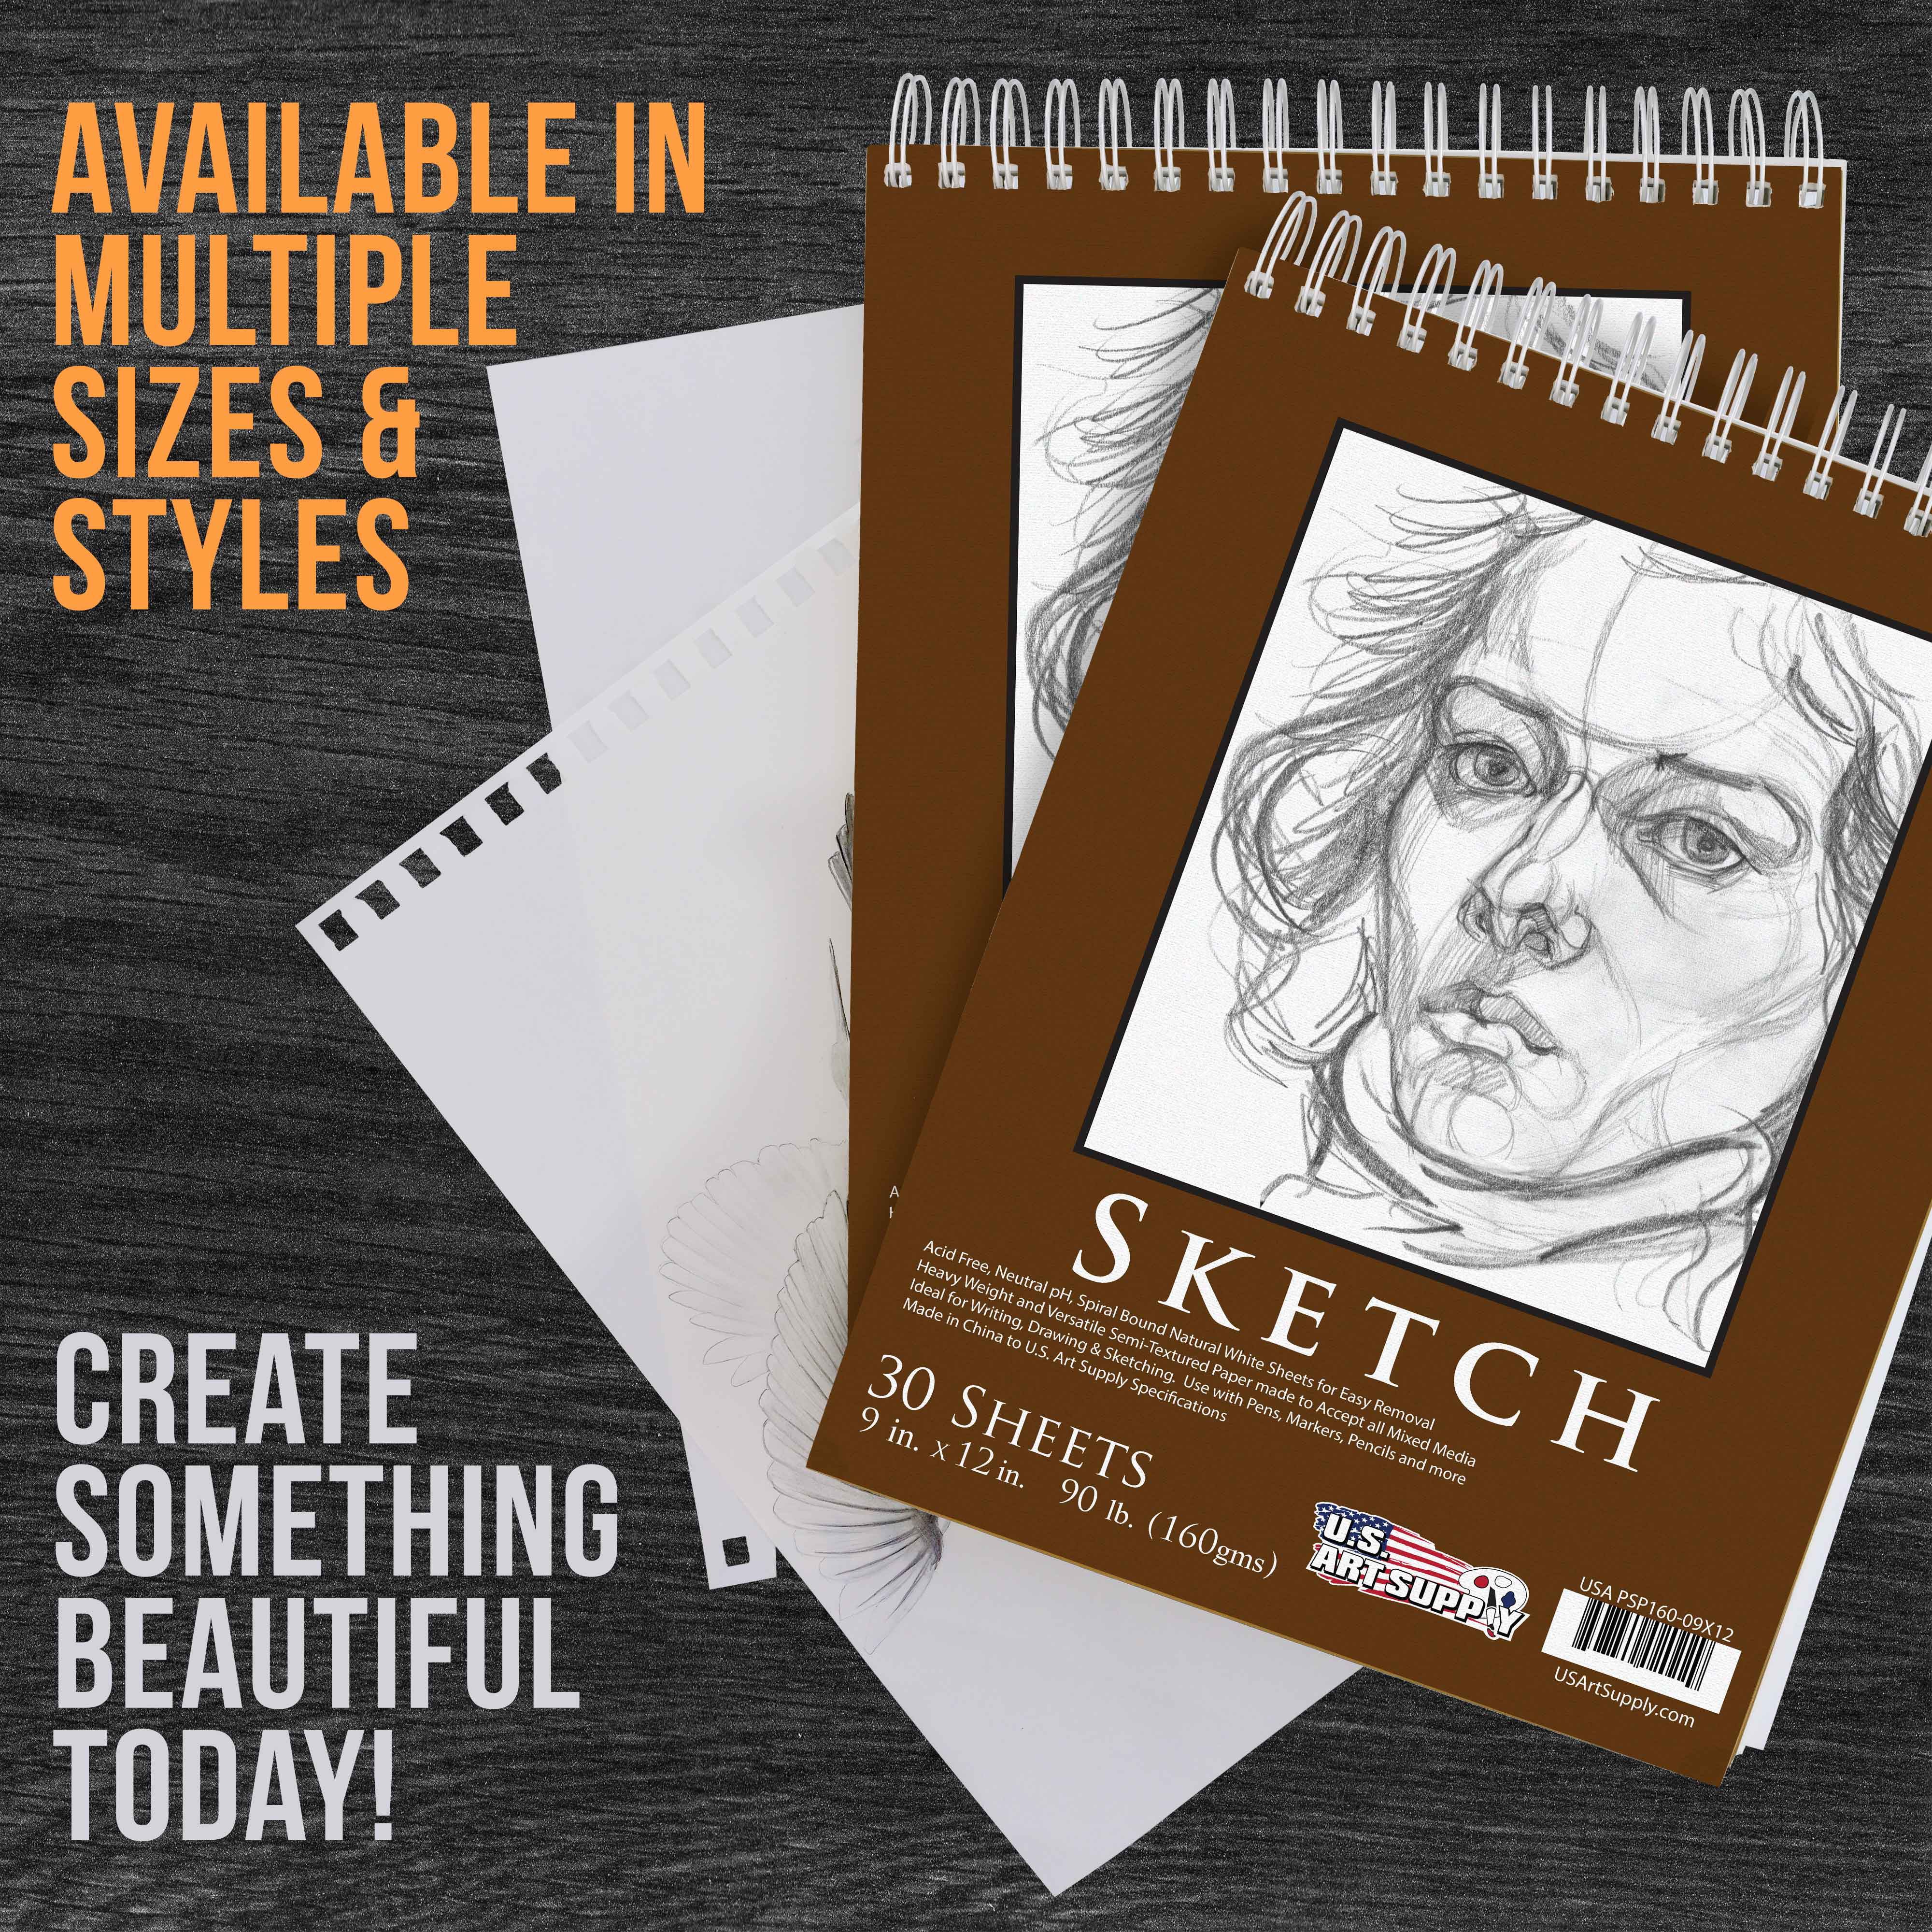 Sketchbook: large sketch book notebook, art cover, for painting, drawing,  sketching, drawings ideas sketches, 120 pages blank paper pencil sketch pad   and paper crafts lover gift (ART SKETCHBOOKS): Supplies, Art:  9798555579652